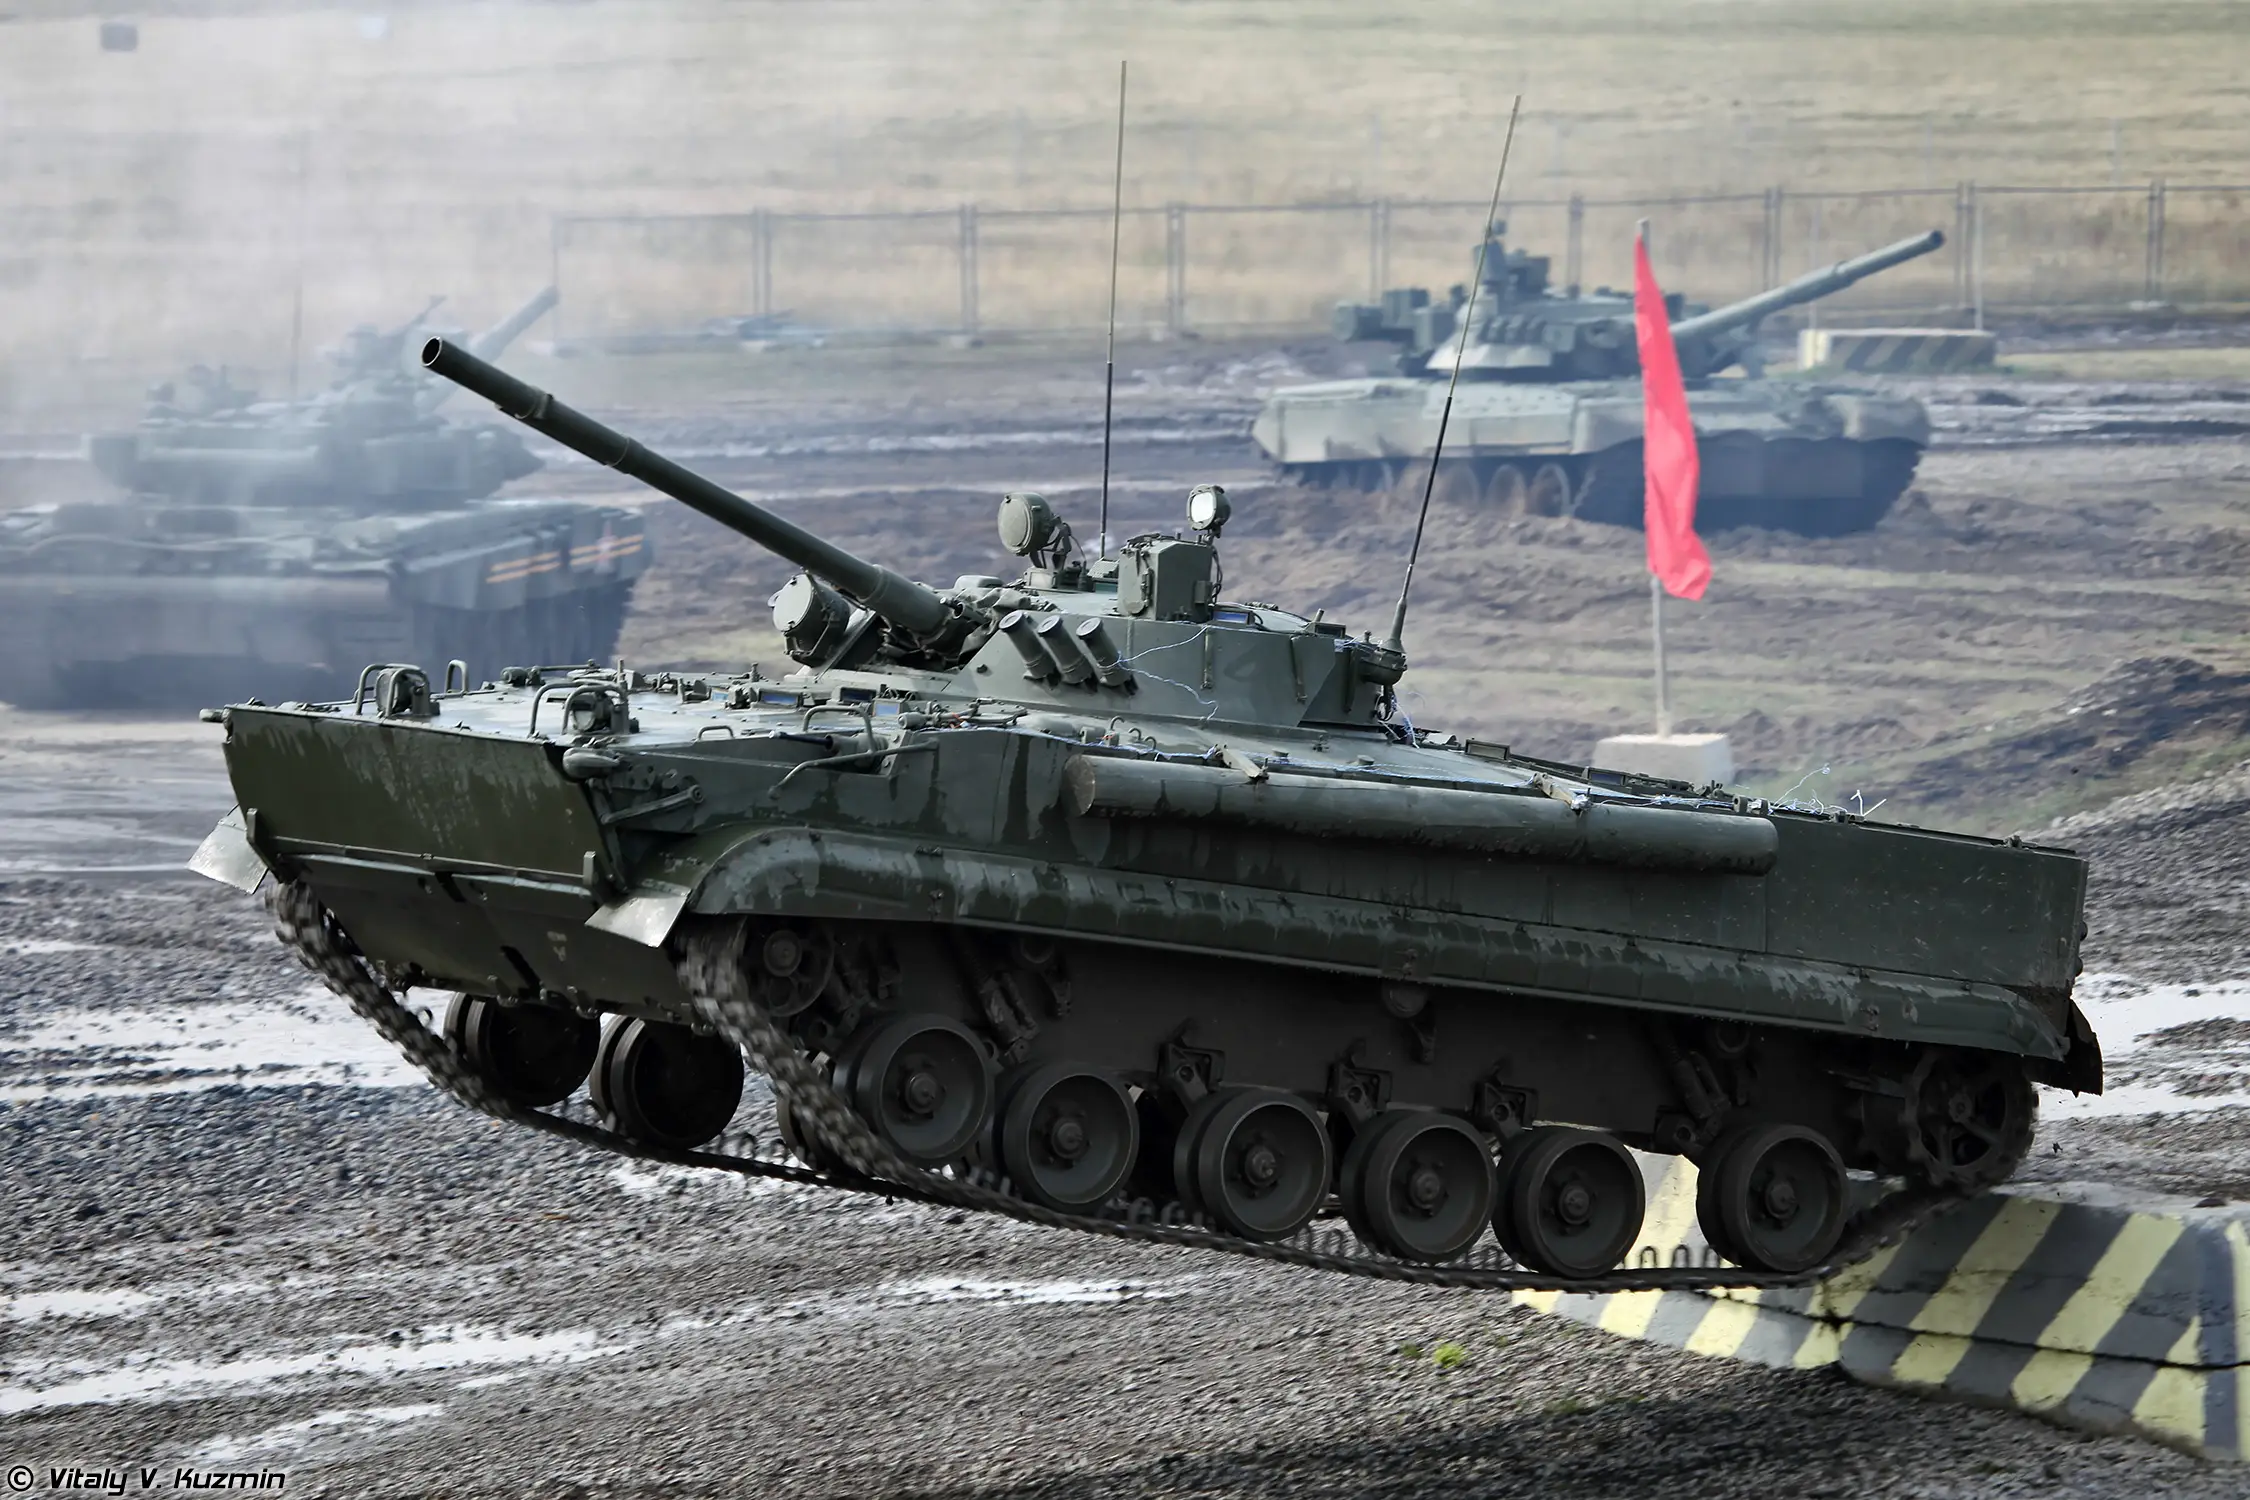 BMP-3: The powerful Russian IFV - GEOPOLITIKI